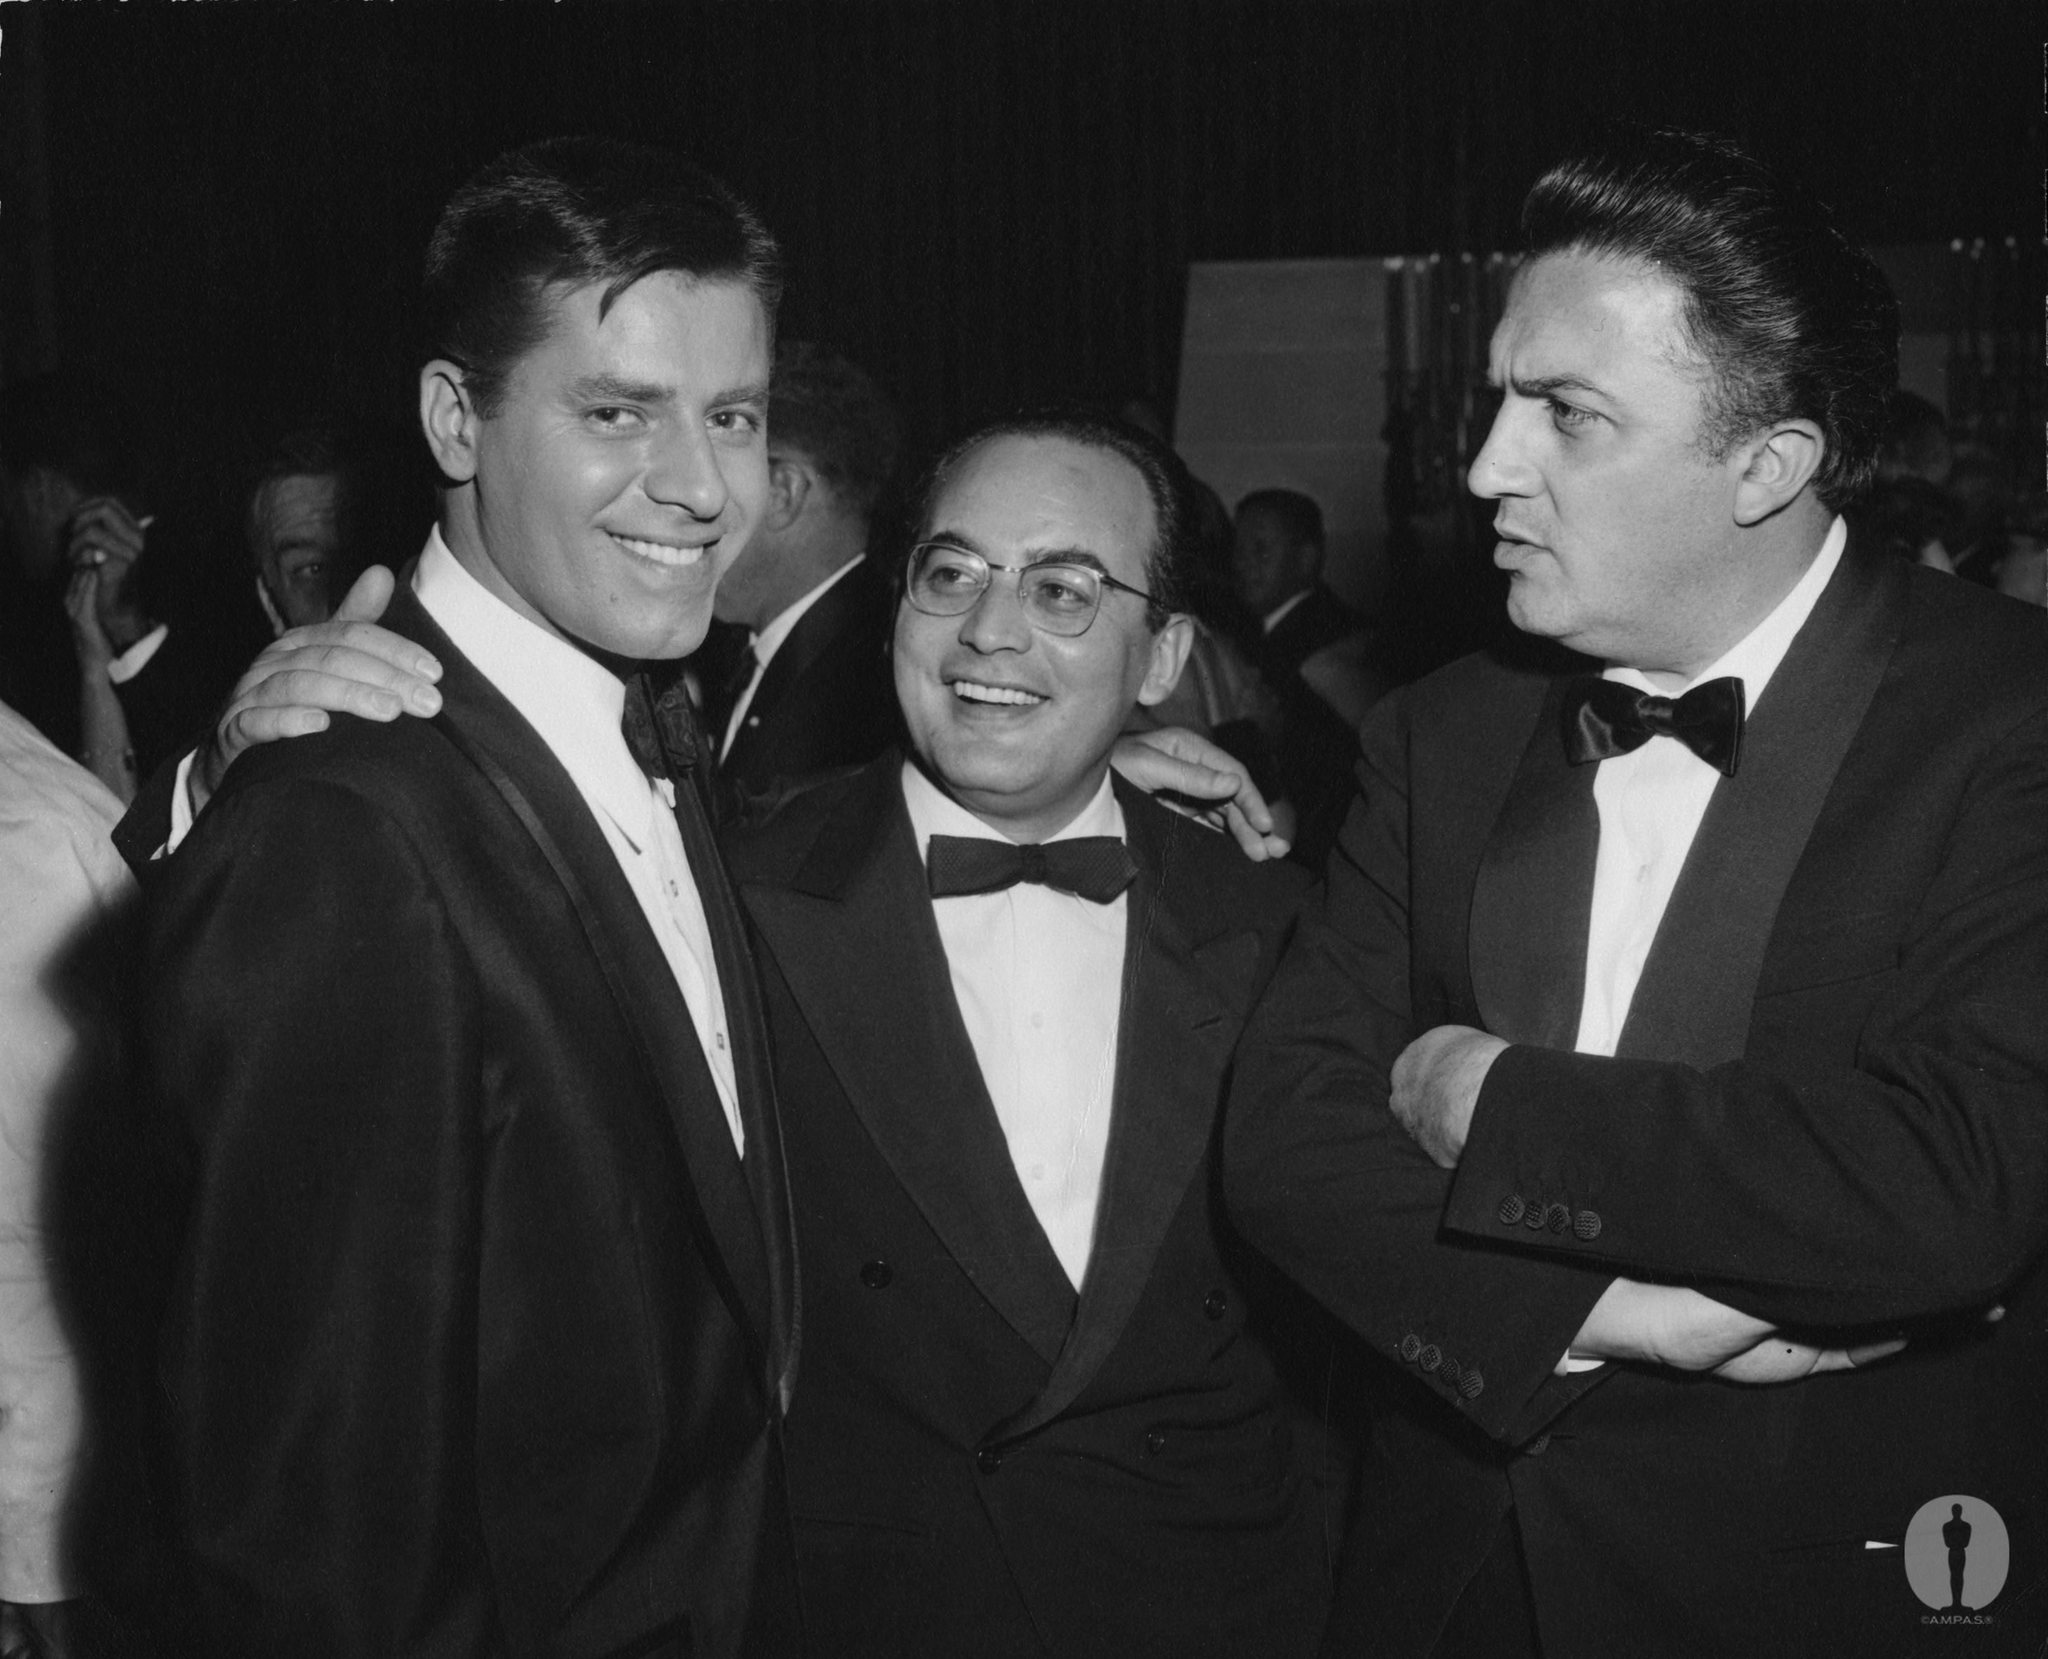 Jerry Lewis with Best Foreign Language Film producer Dino De Laurentiis and director Federico Fellini (